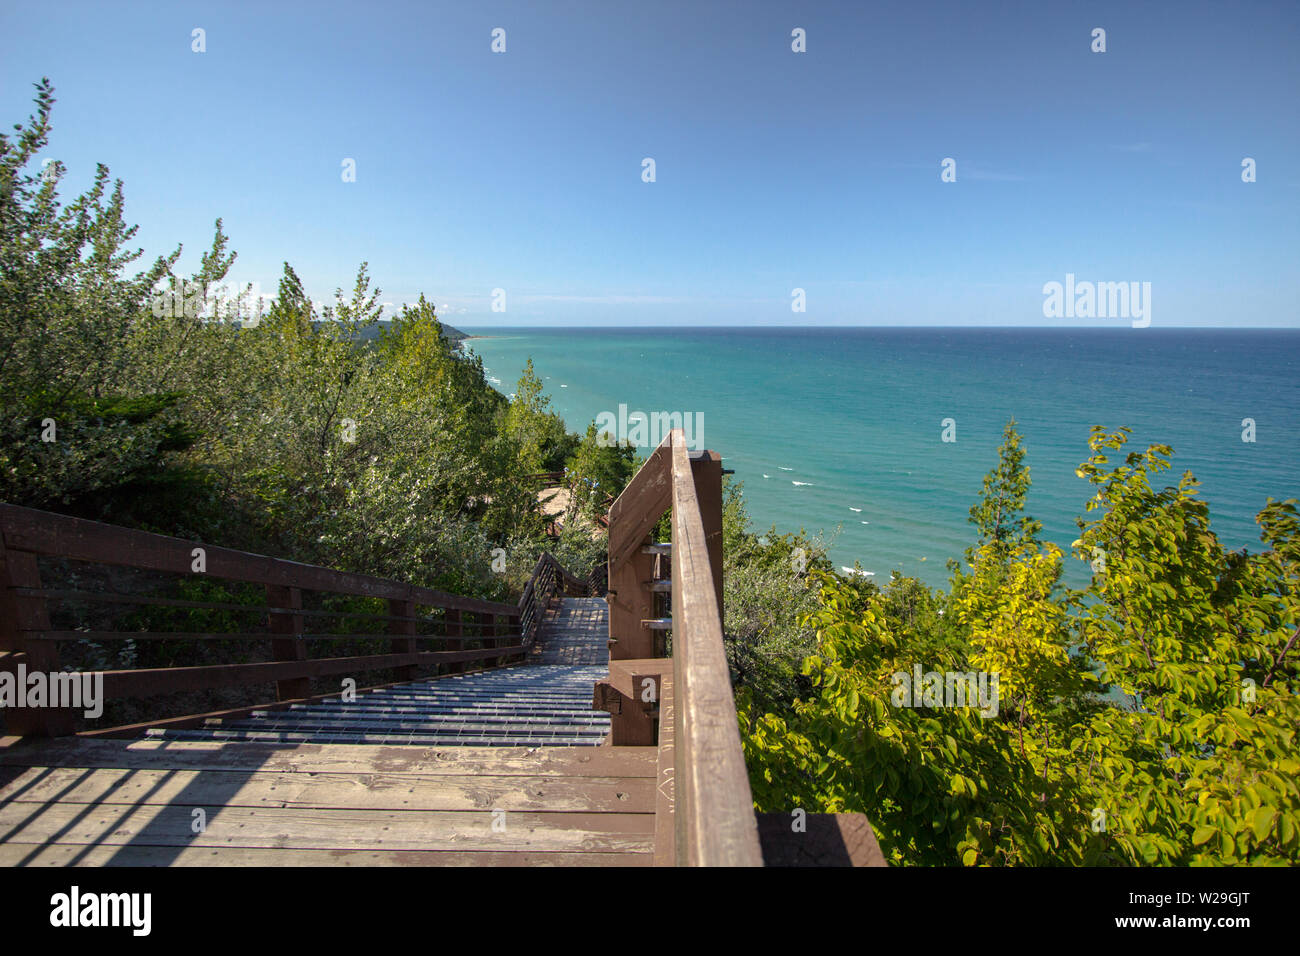 Inspiration Point On Lake Michigan. Inspiration Point is located at a roadside park along highway M-22 in Arcadia, Michigan. Stock Photo